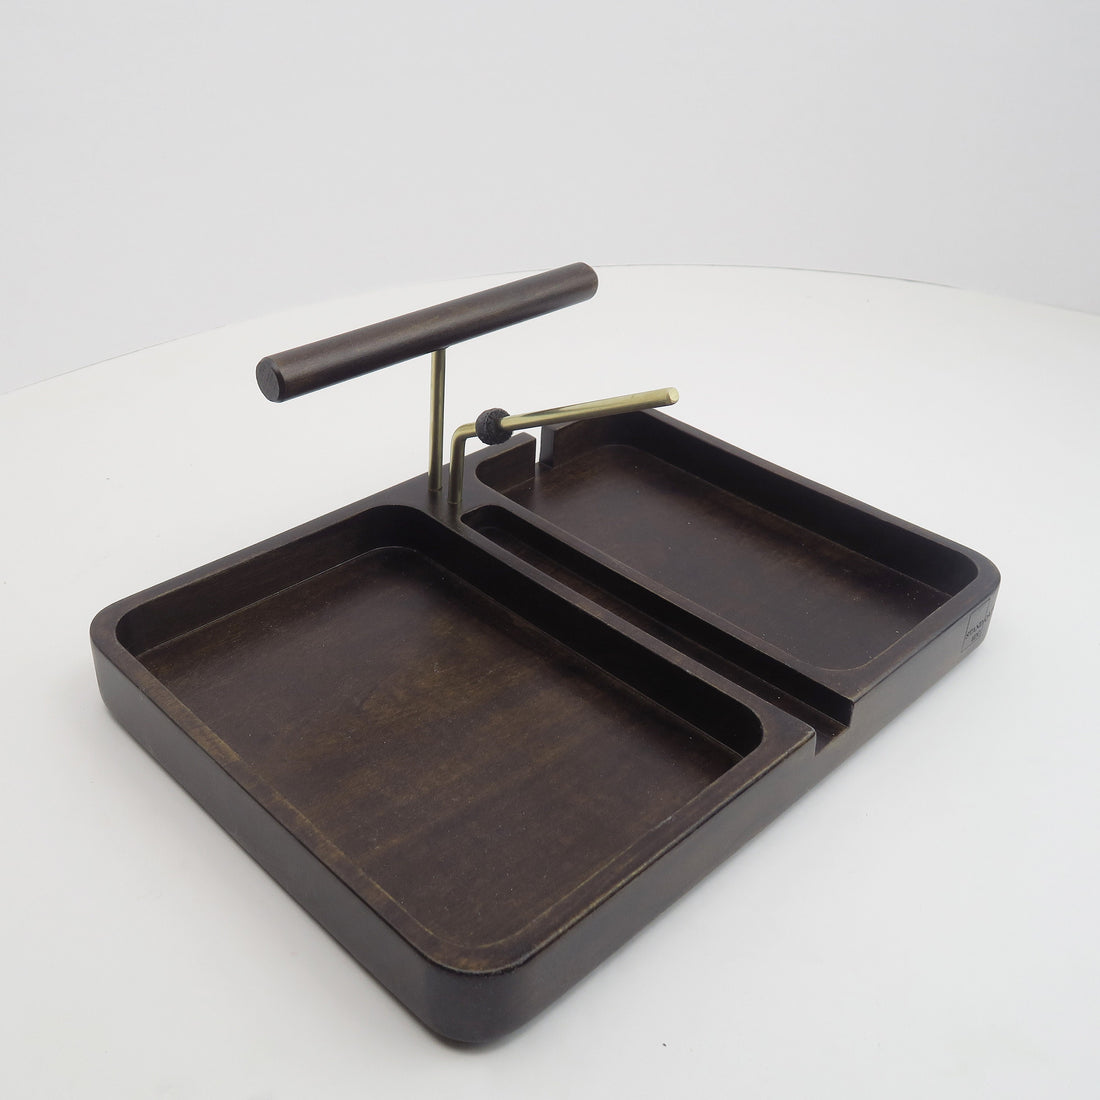 Fathers day gift, organizer with accessory bar , Station for EDC, bedside table solid brass EDC holder, EDC tray.